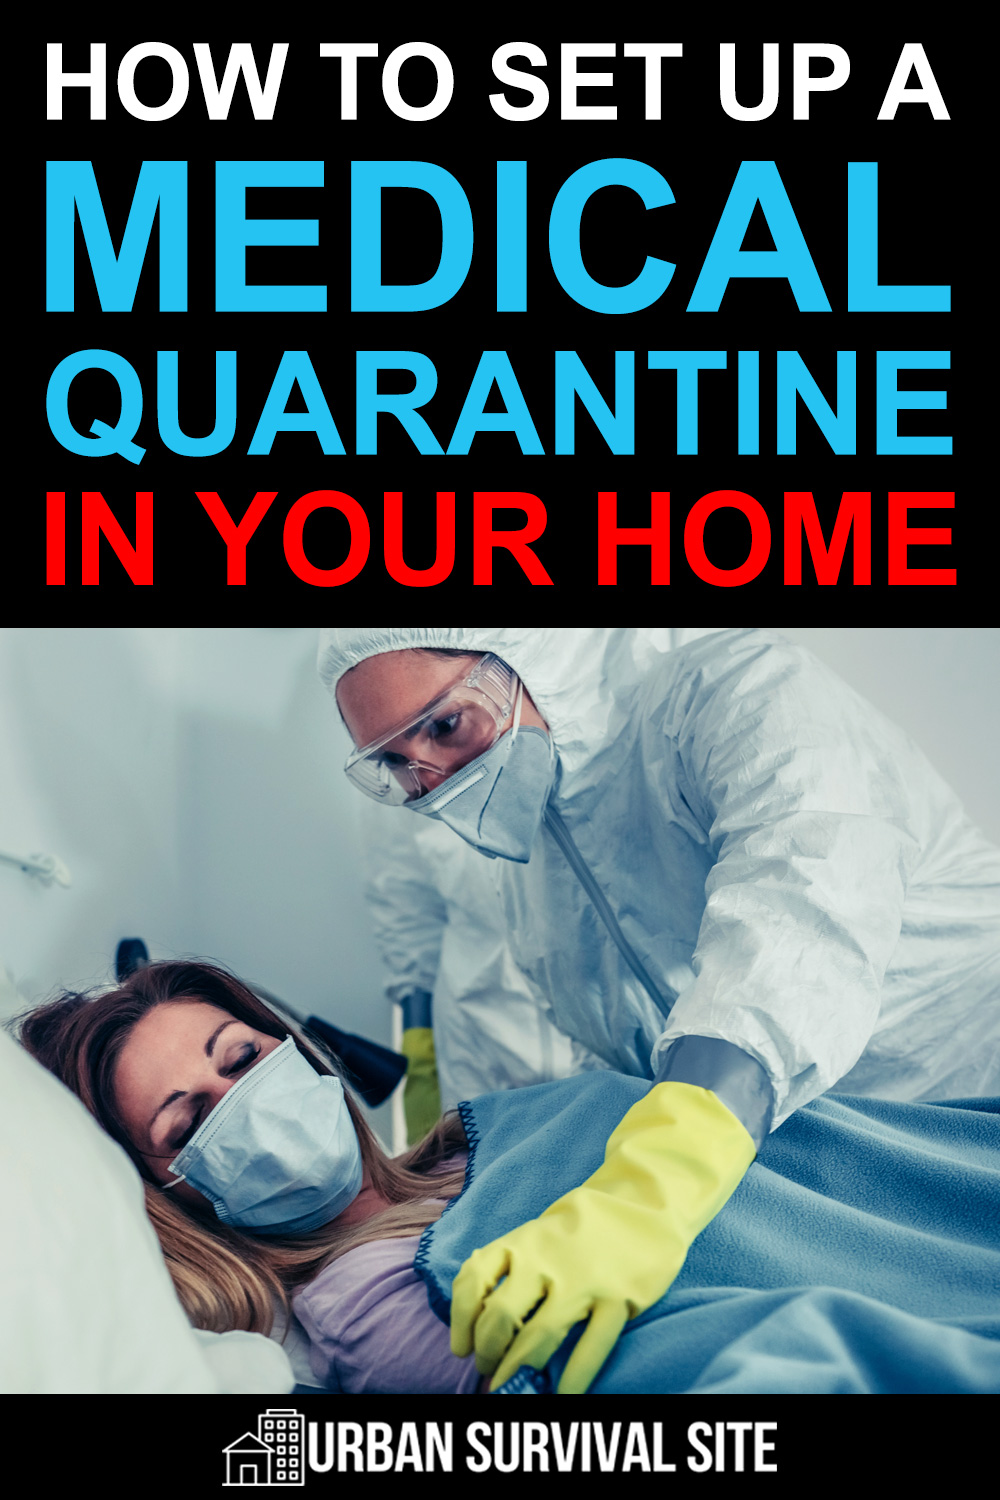 How To Set Up A Medical Quarantine In Your Home